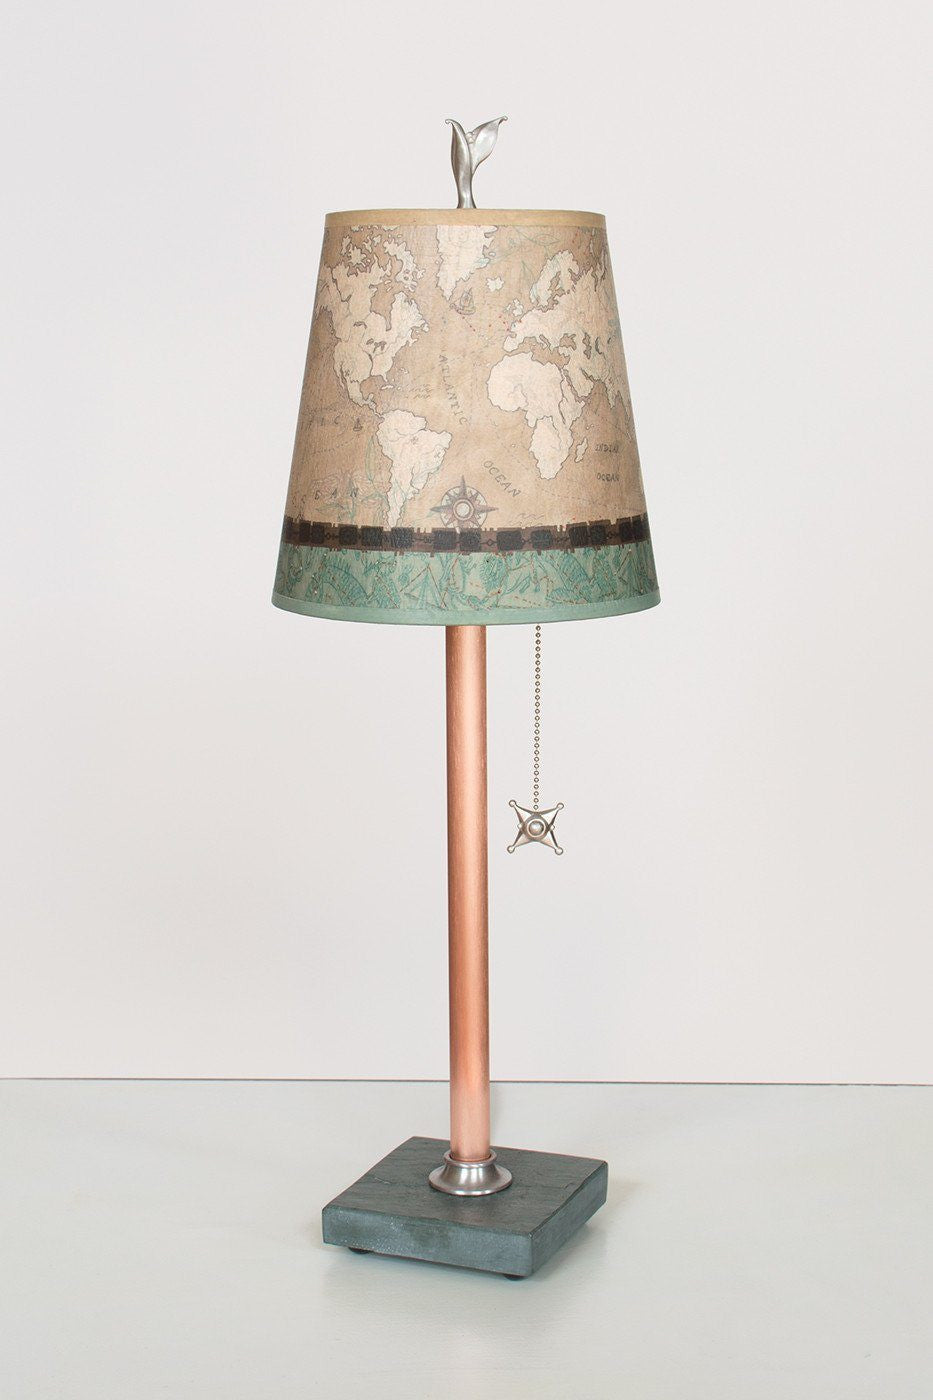 Janna Ugone & Co Table Lamps Copper Table Lamp with Small Drum Shade in Voyages